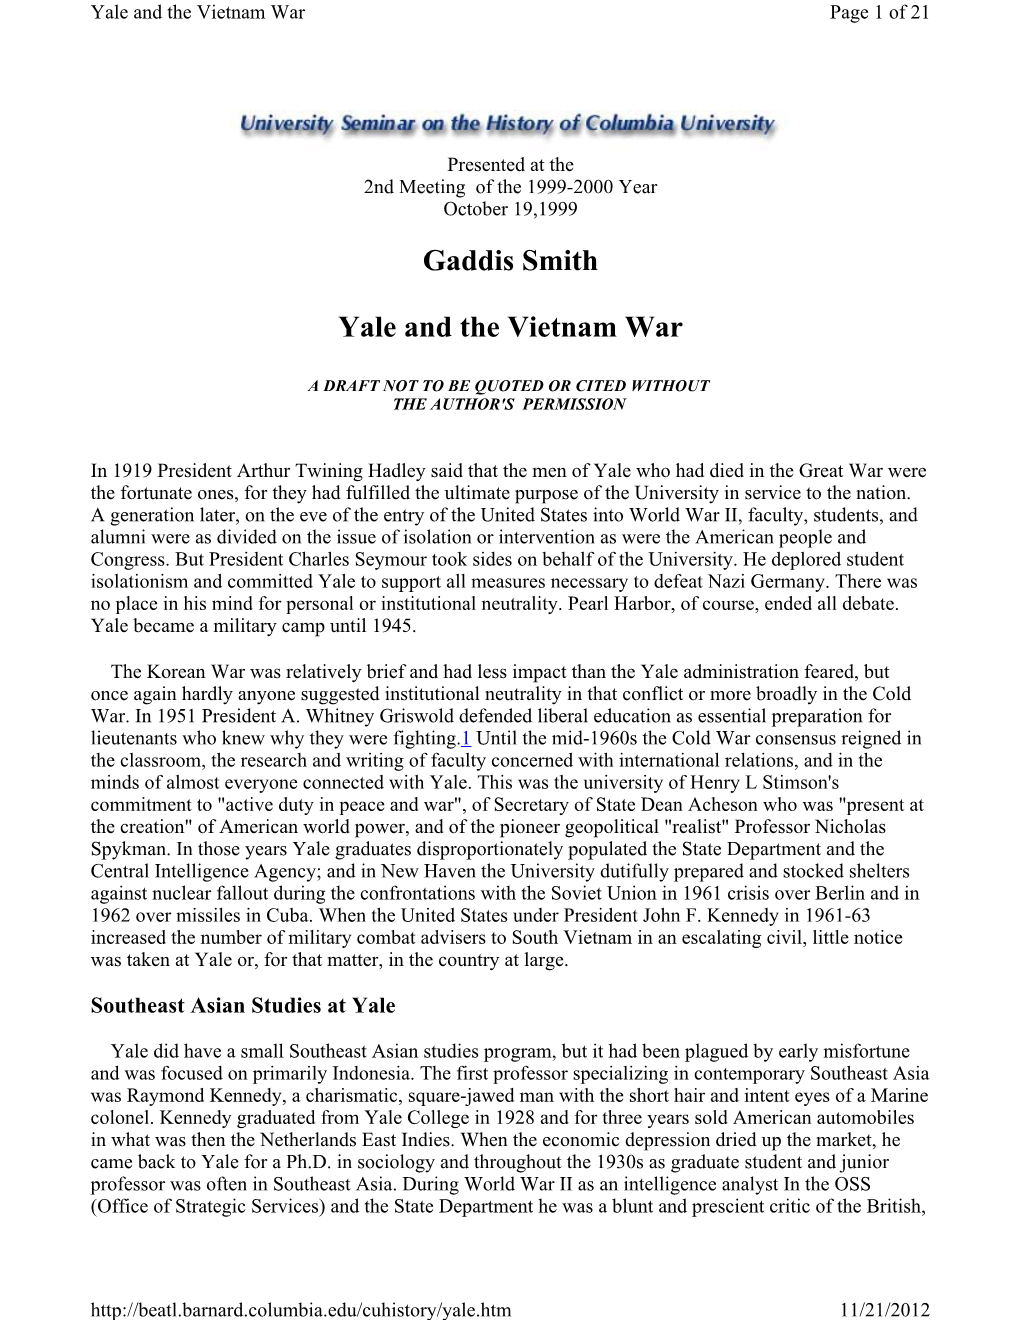 Gaddis Smith Yale and the Vietnam